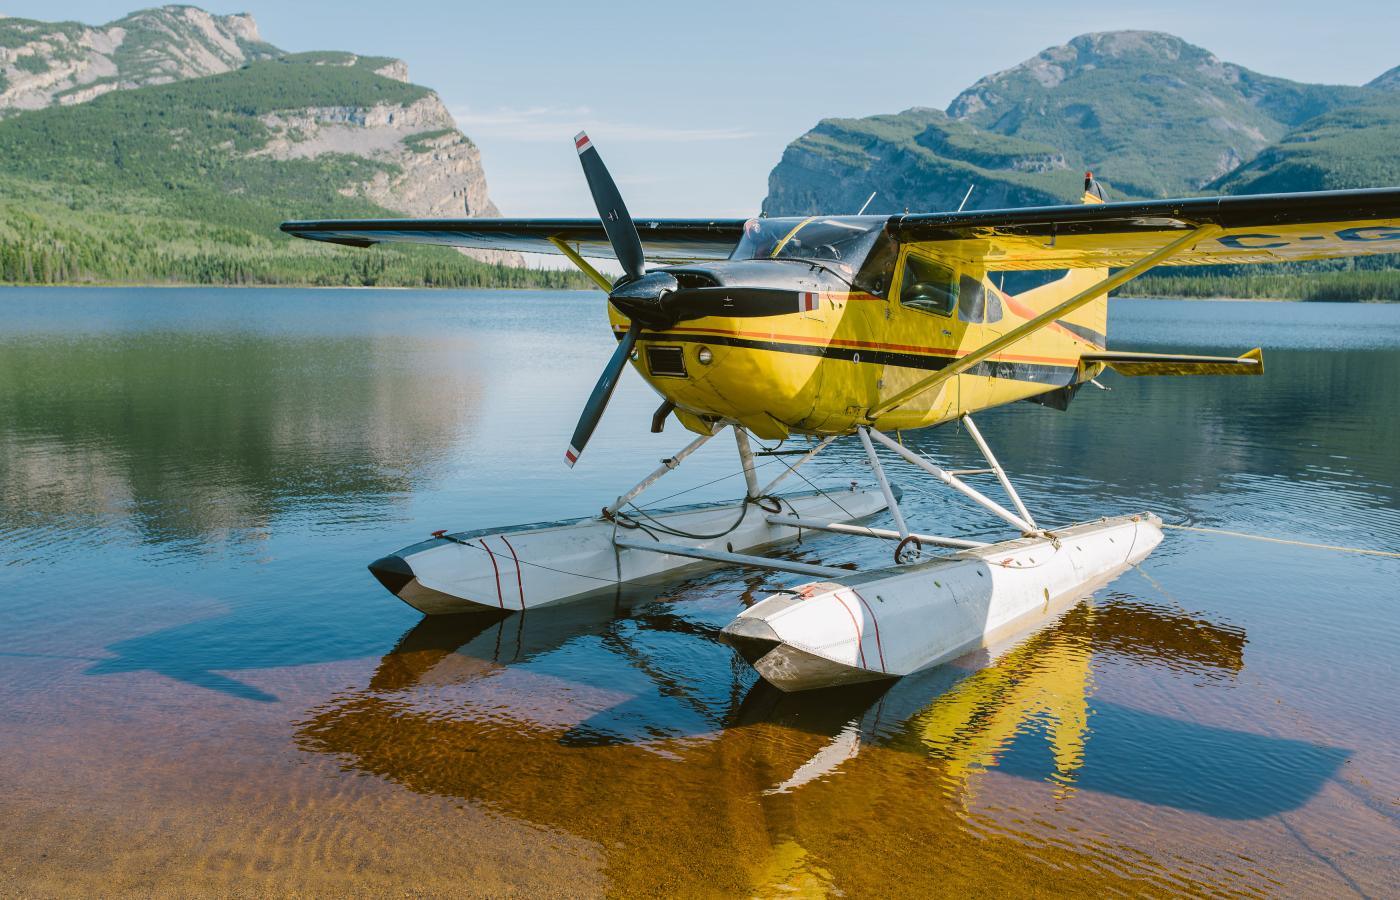 planespotting: Your guide to watching bushplanes in the Northwest Territories. Spectacular Northwest Territories